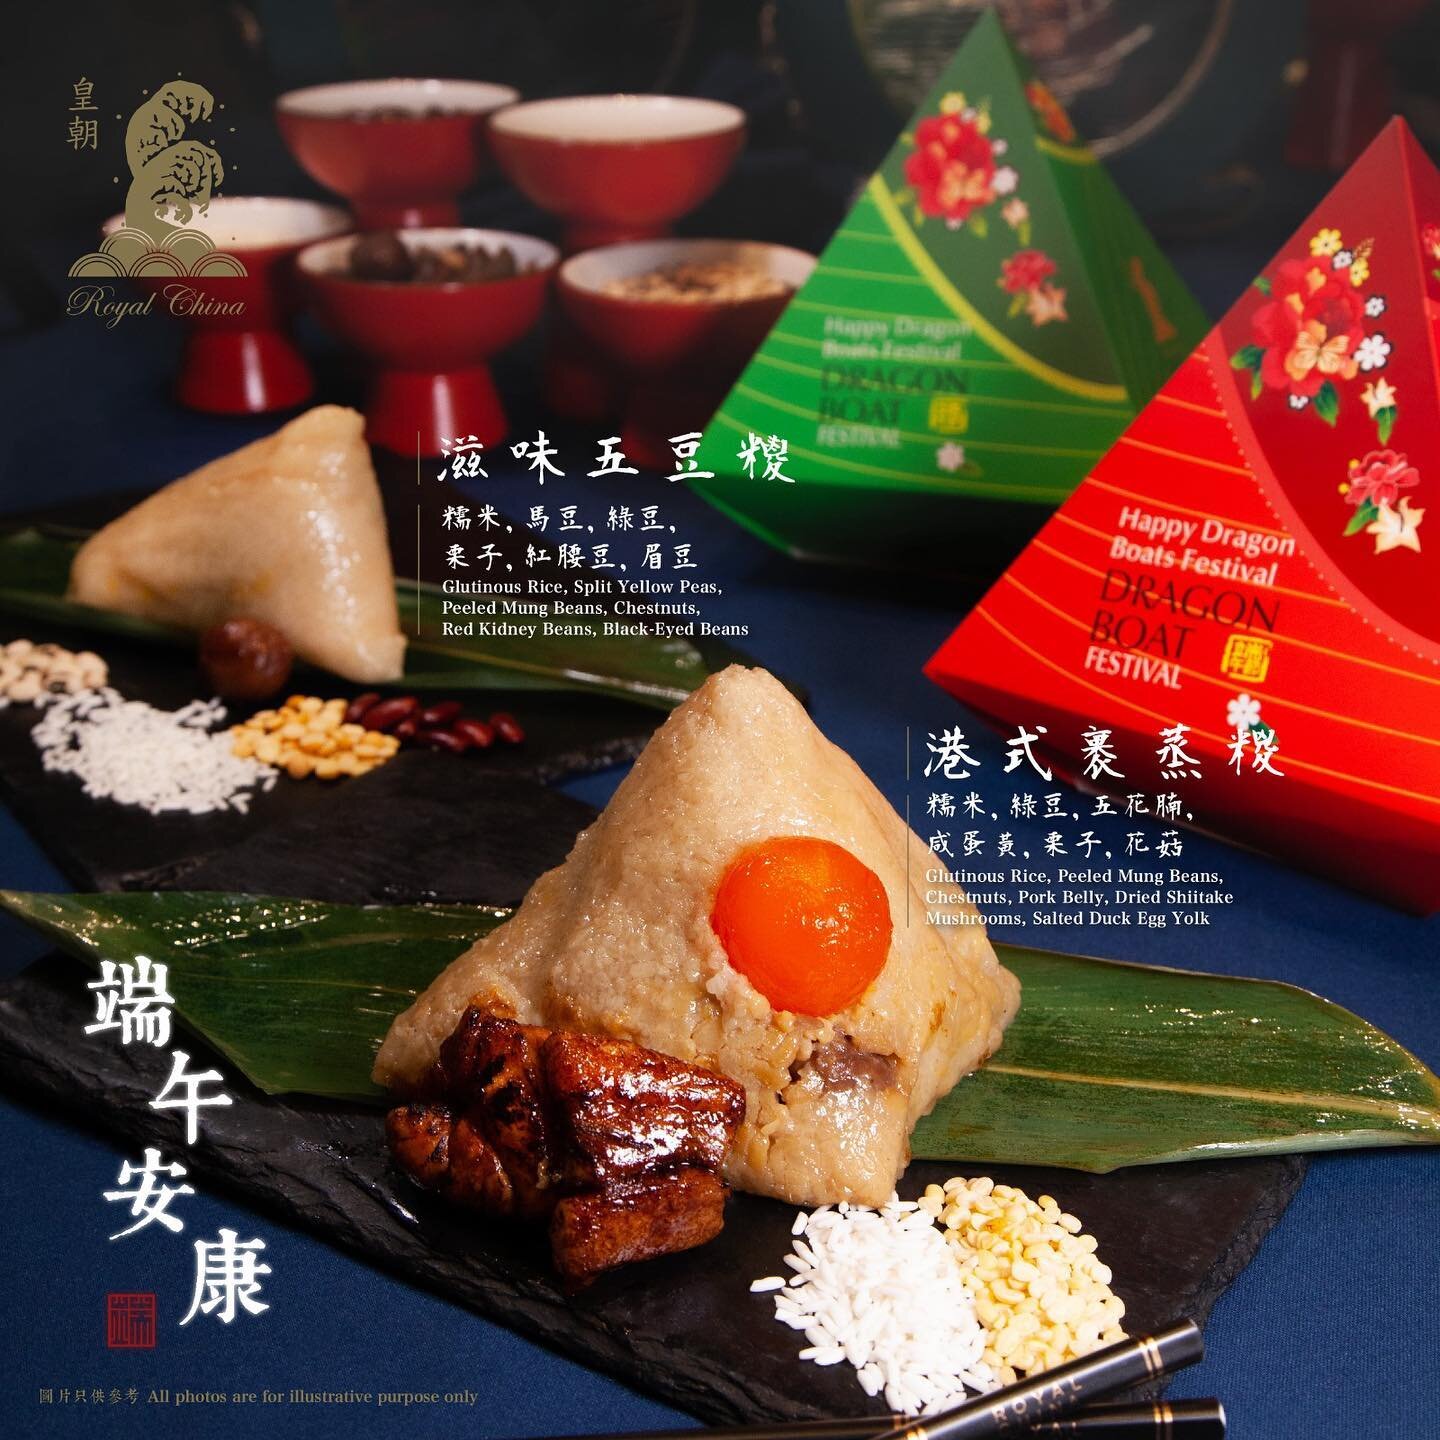 Experience the delicious allure of Zongzi (Rice Dumpling) this Dragon Boat Festival.

Zongzi is the product of centuries old tradition and is normally eaten during Dragon Boat Festival. 

Place your order now by calling the restaurant ☎️ 

#zongzi #j